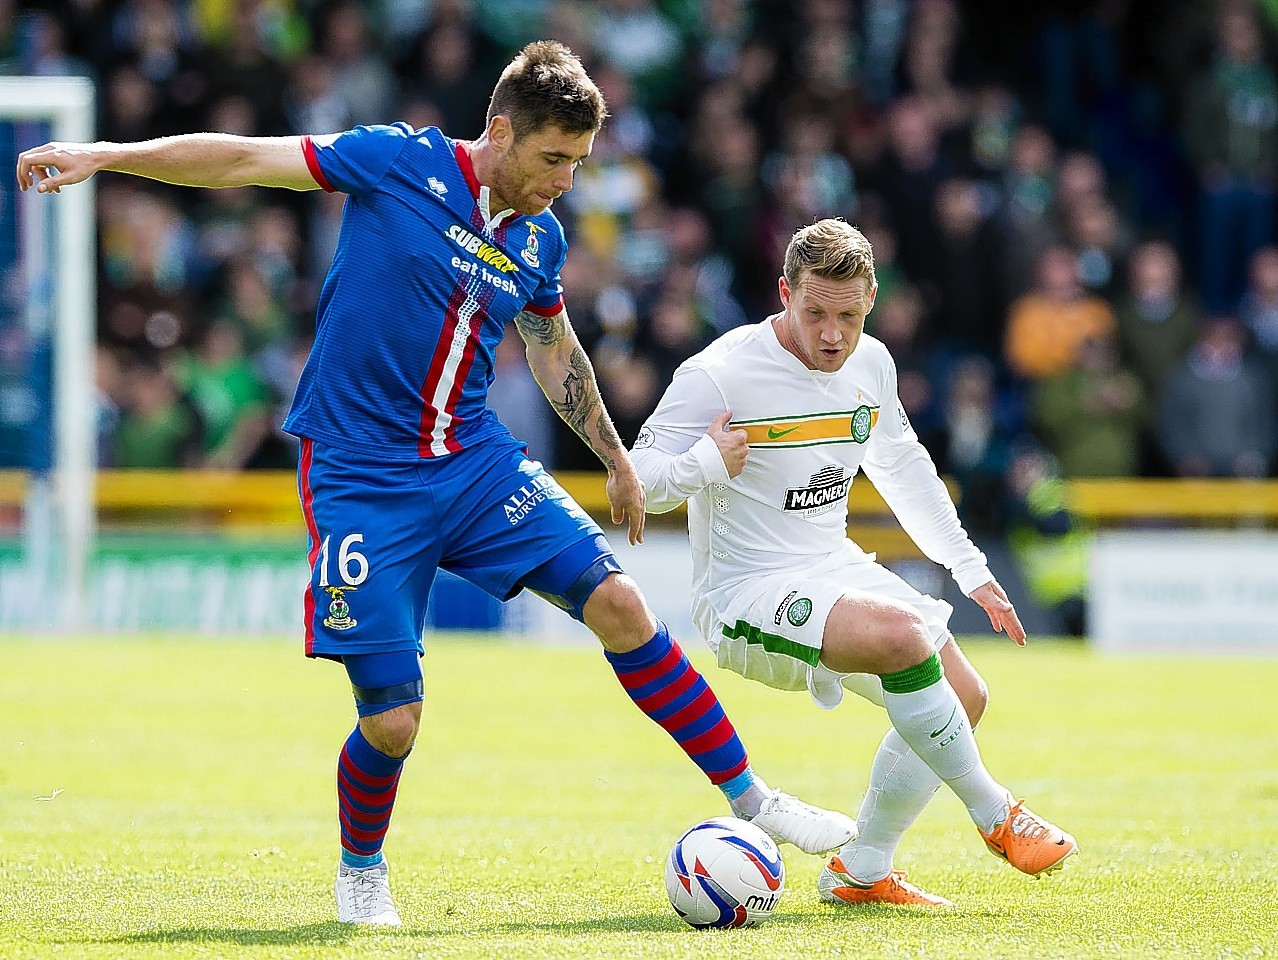 Caley Thistle host Celtic this afternoon